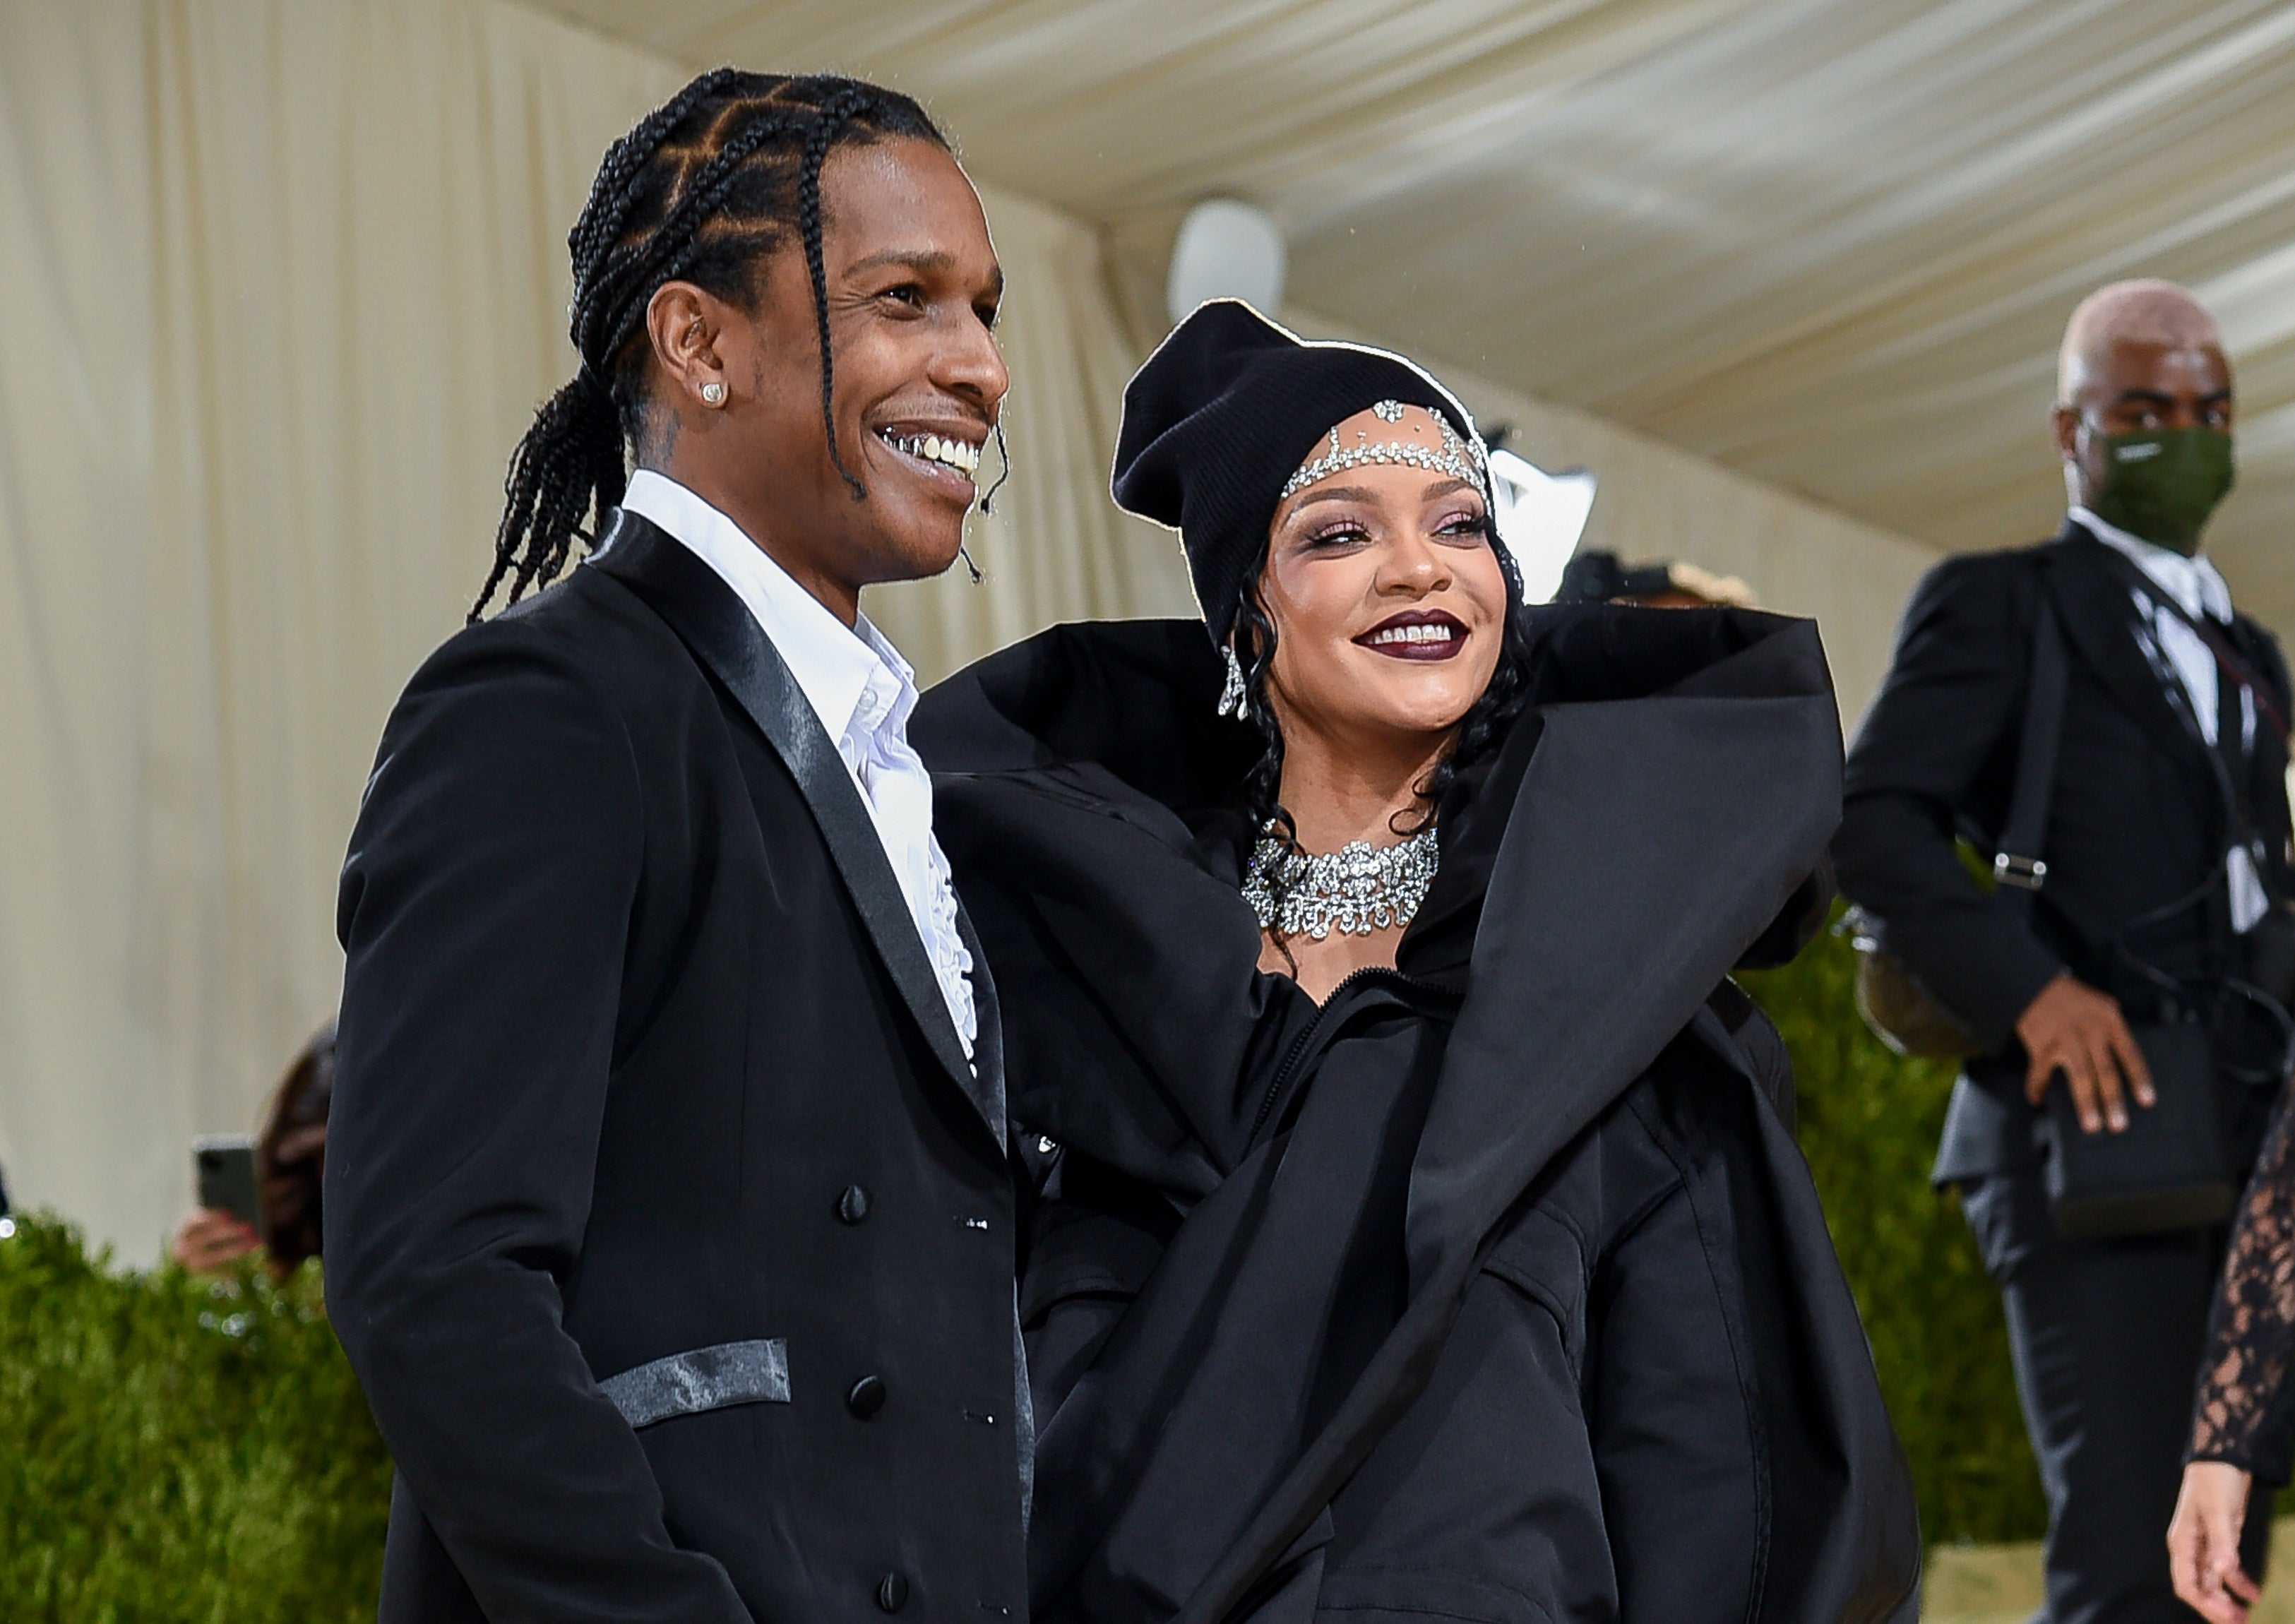 ASAP Rocky Says Rihanna Is the One